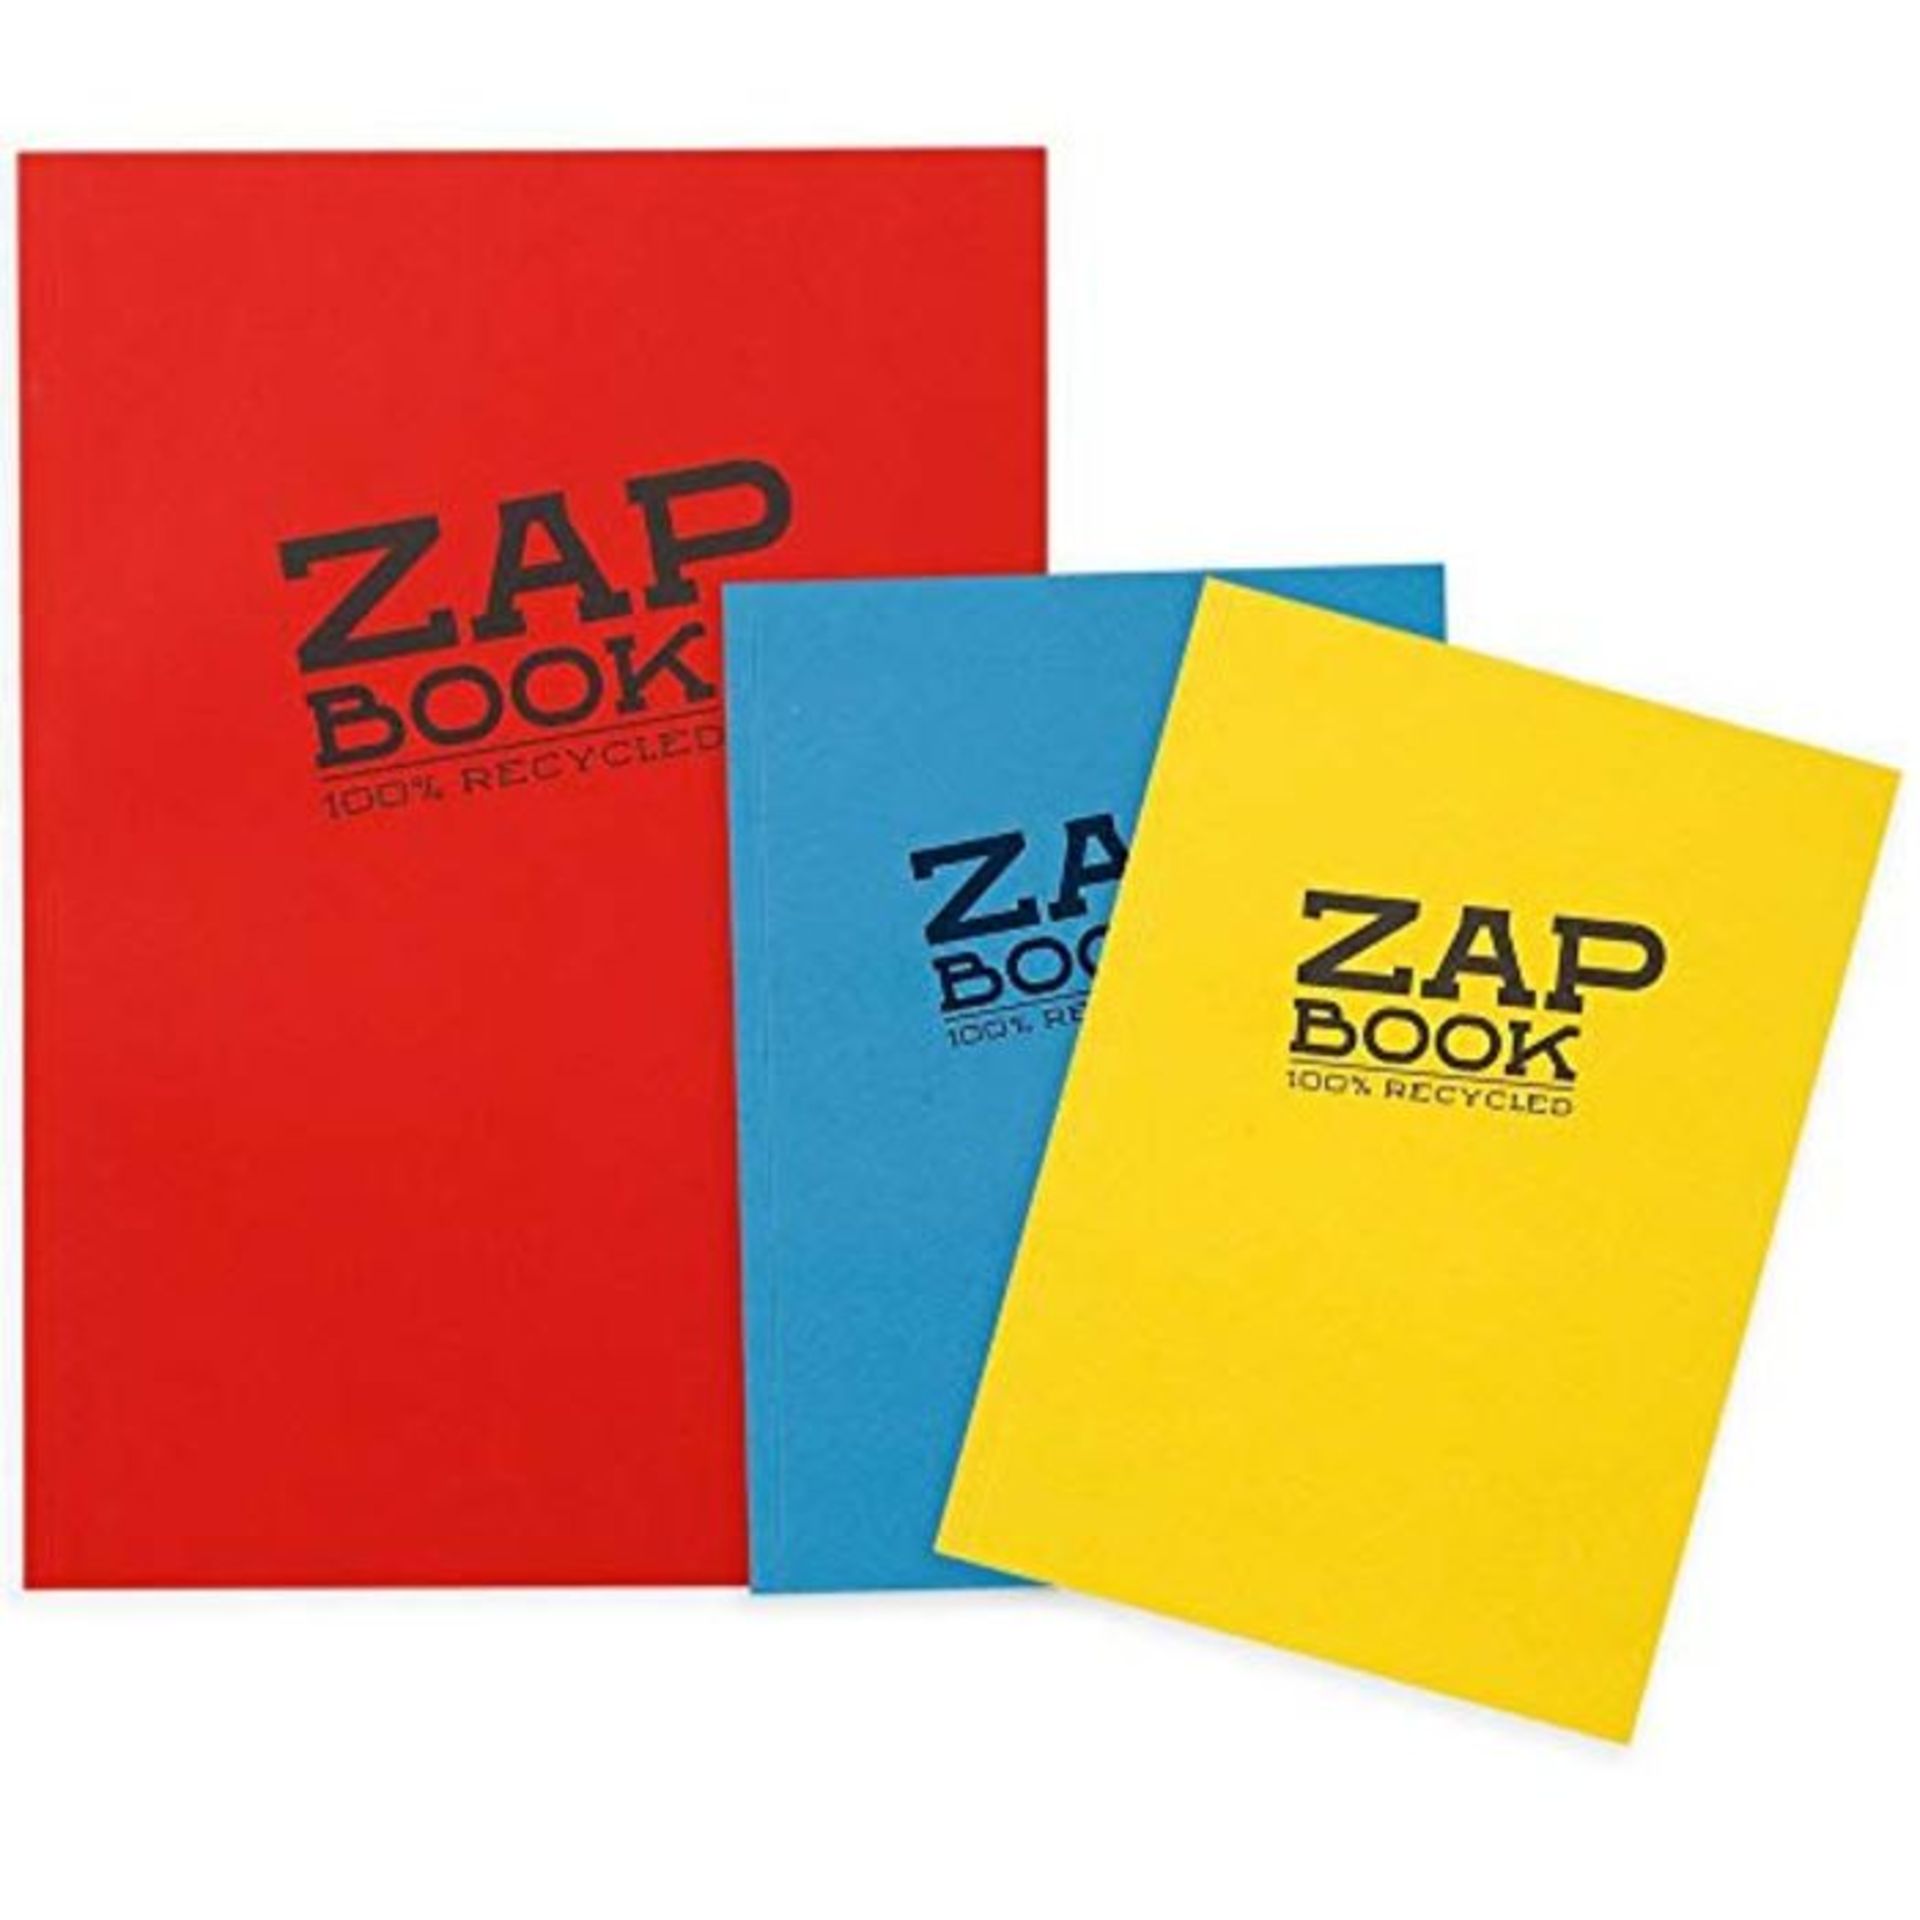 Clairefontaine Zap Book 3355AMZC Pack of 3 Glued Notebooks 160 Pages 100% Recycled Pla